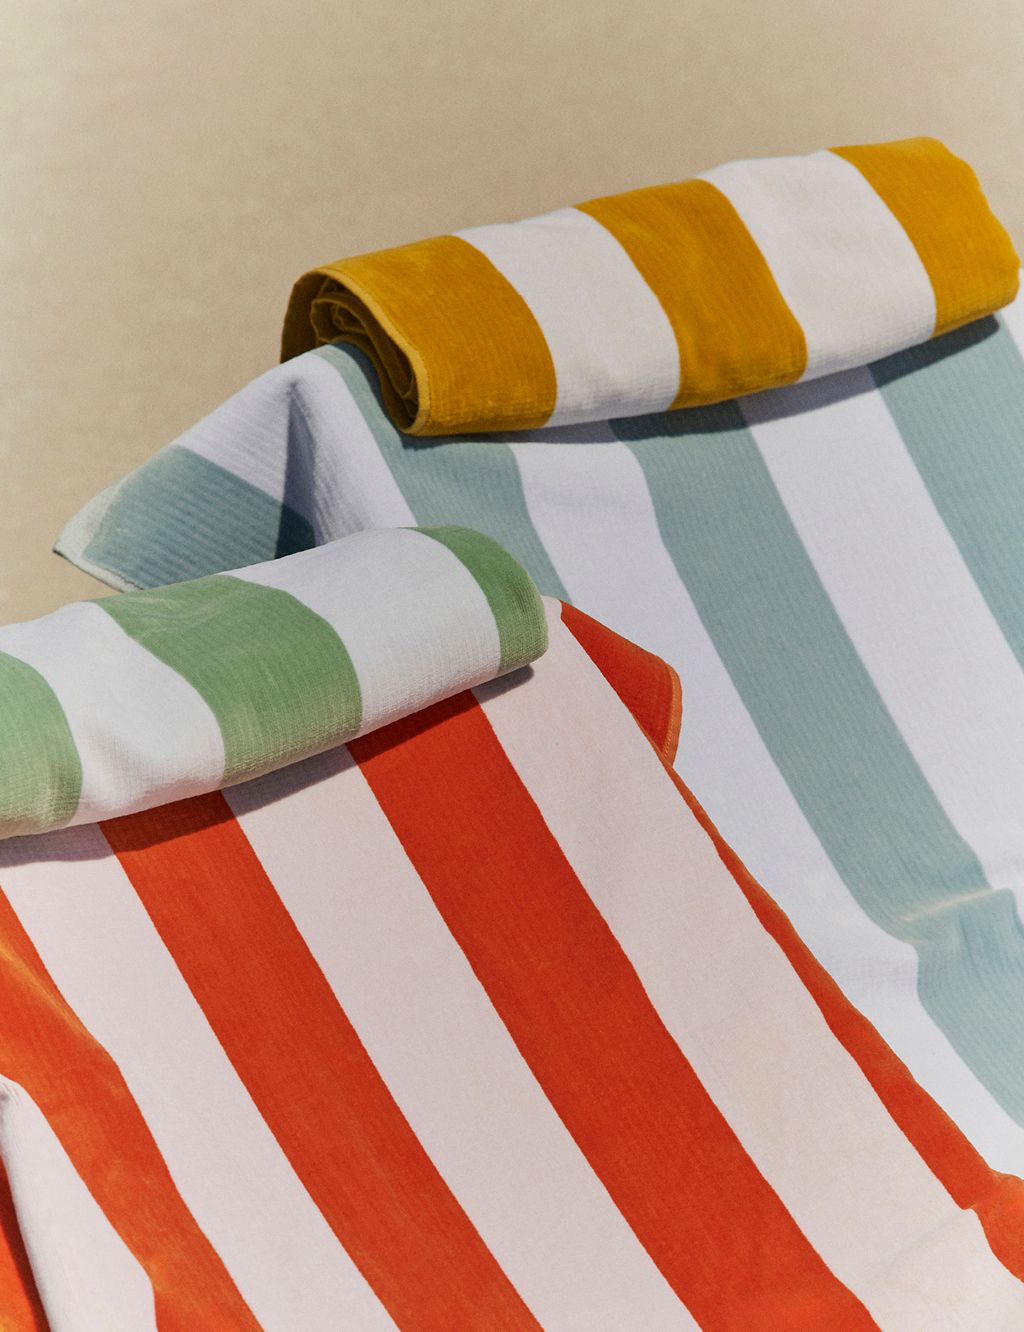 Pure Cotton Striped Sand Resistant Beach Towel 4 of 4